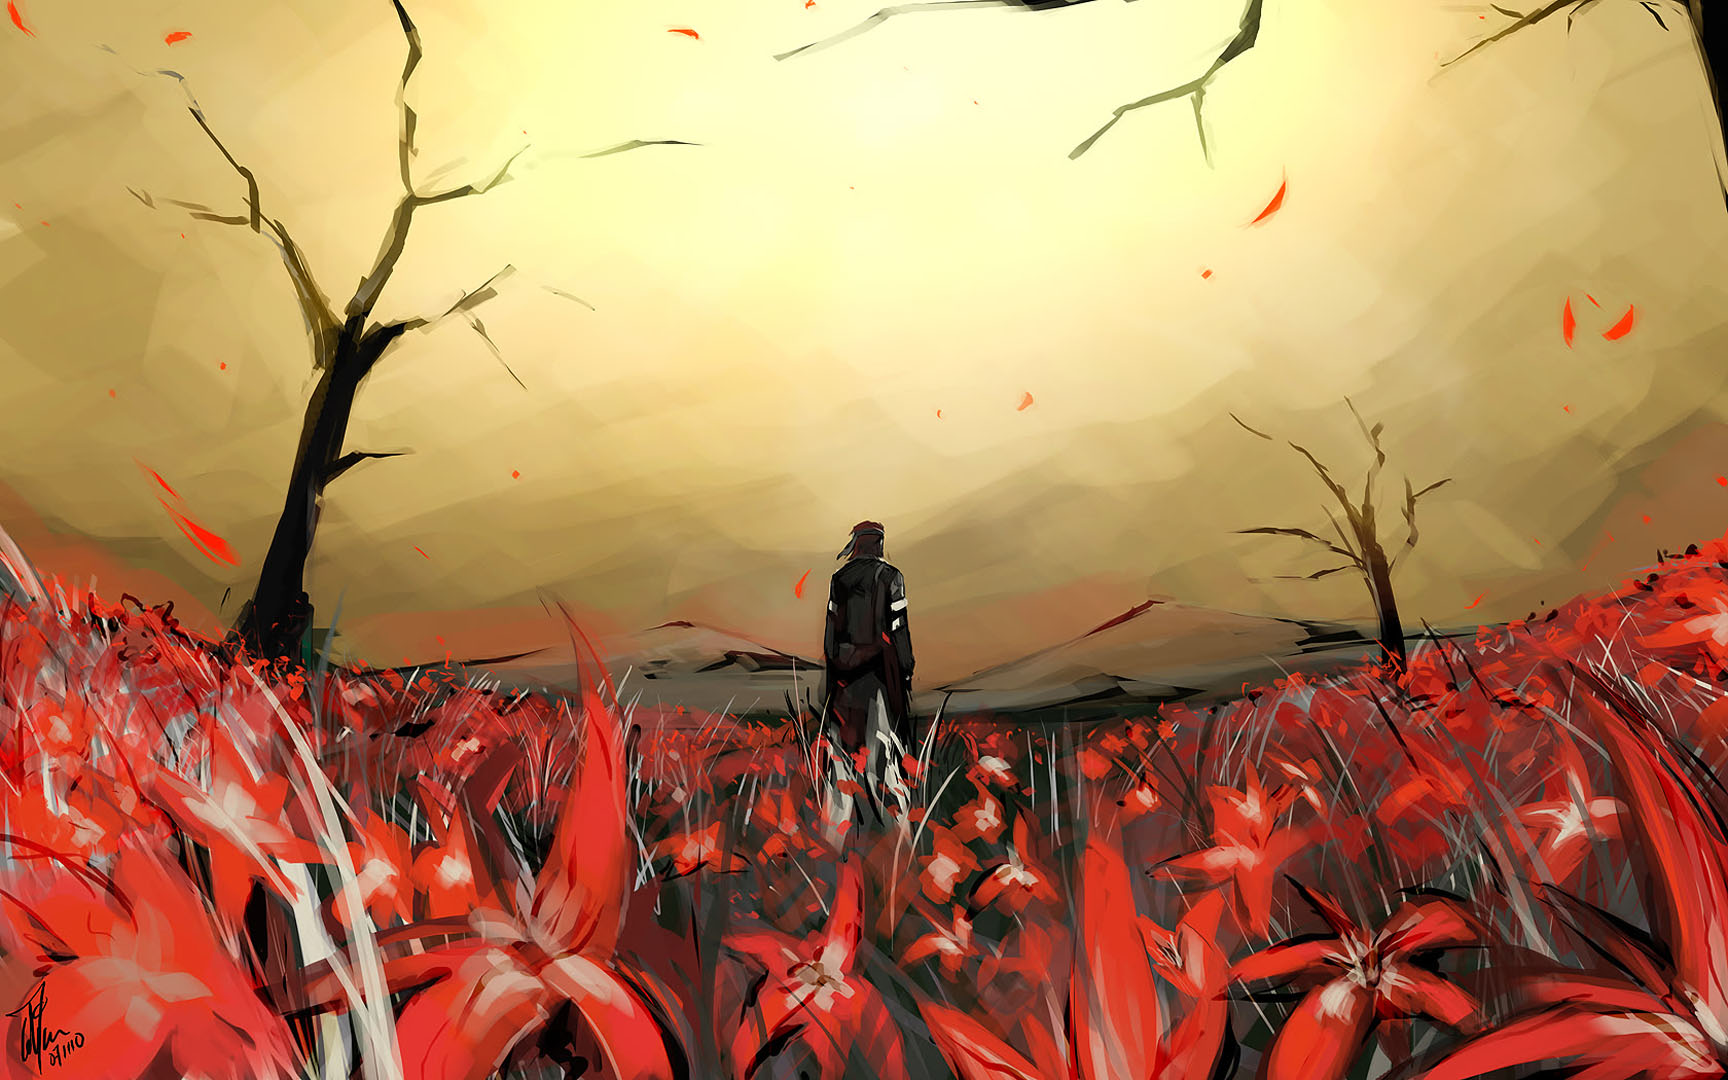 Surrounded By Red Flowers - Action Rpg Games Wallpaper Image